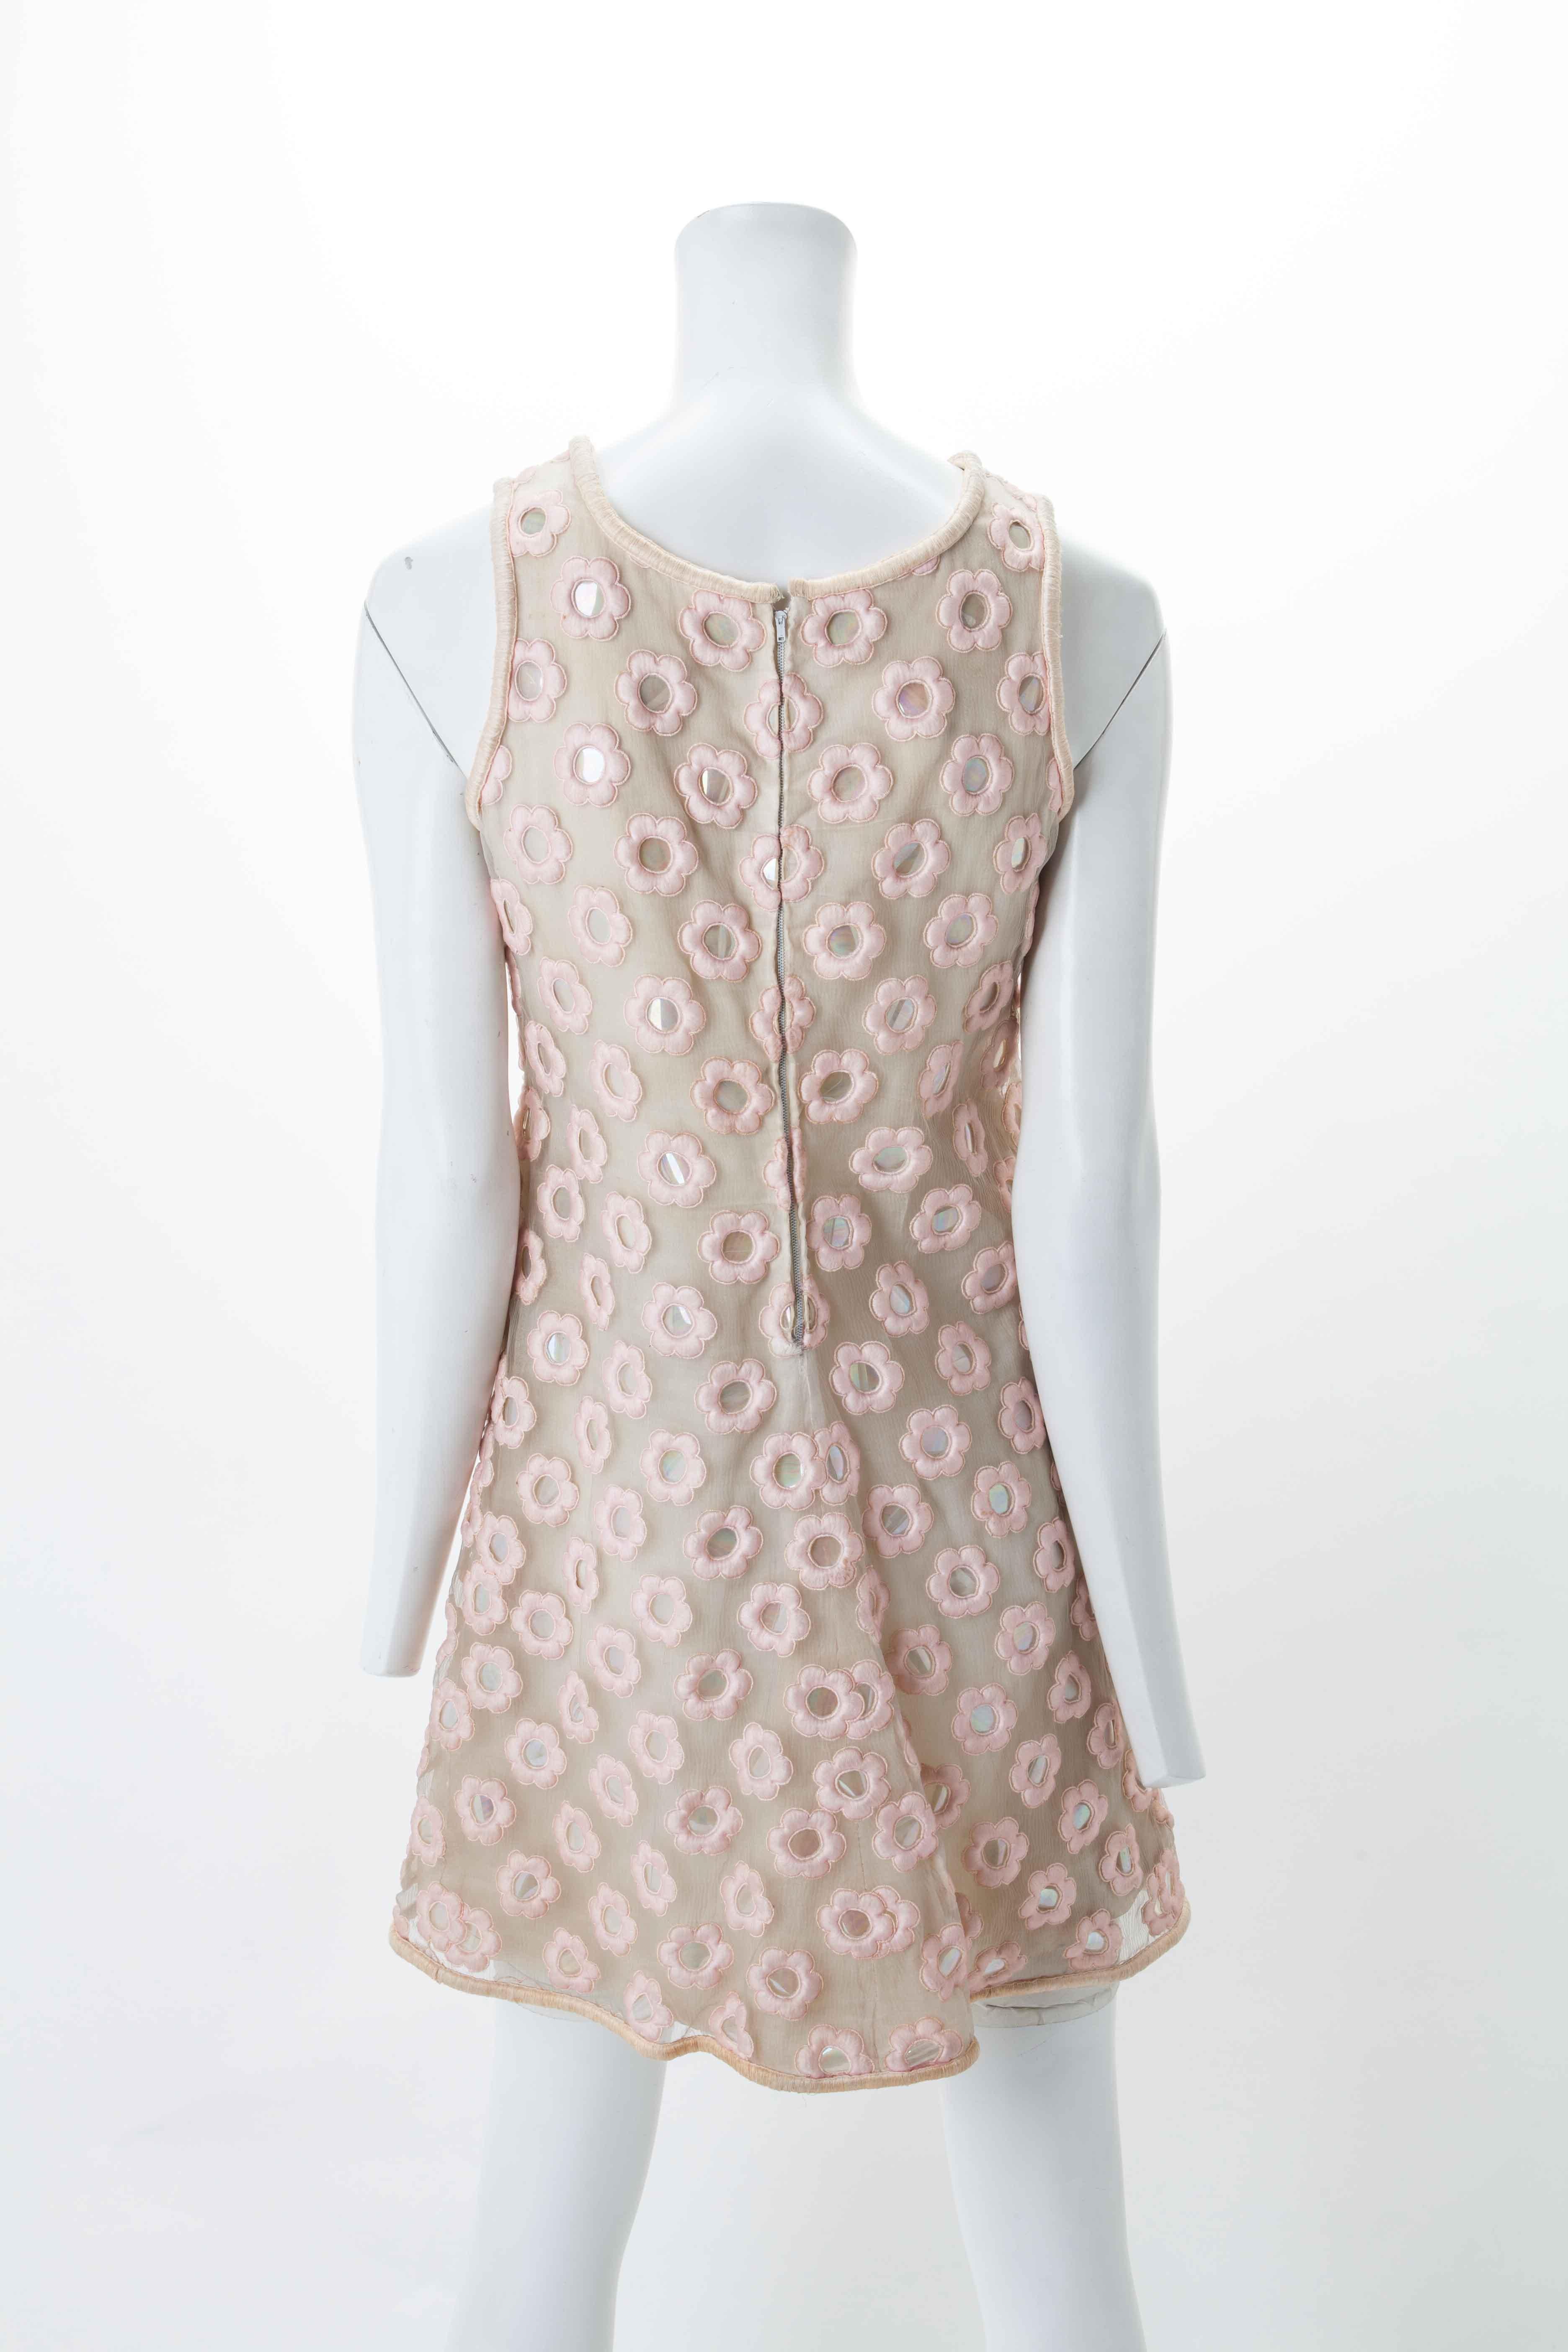 André Courrèges Custom made nude mini-dress with pink daisy motif, ca. 1970s
All-over appliqué A-Line mini dress w/ keyhole cutout above chest. Featuring scalloped petals worked in satin with pink organza overlays. The flowers' center are glimmering